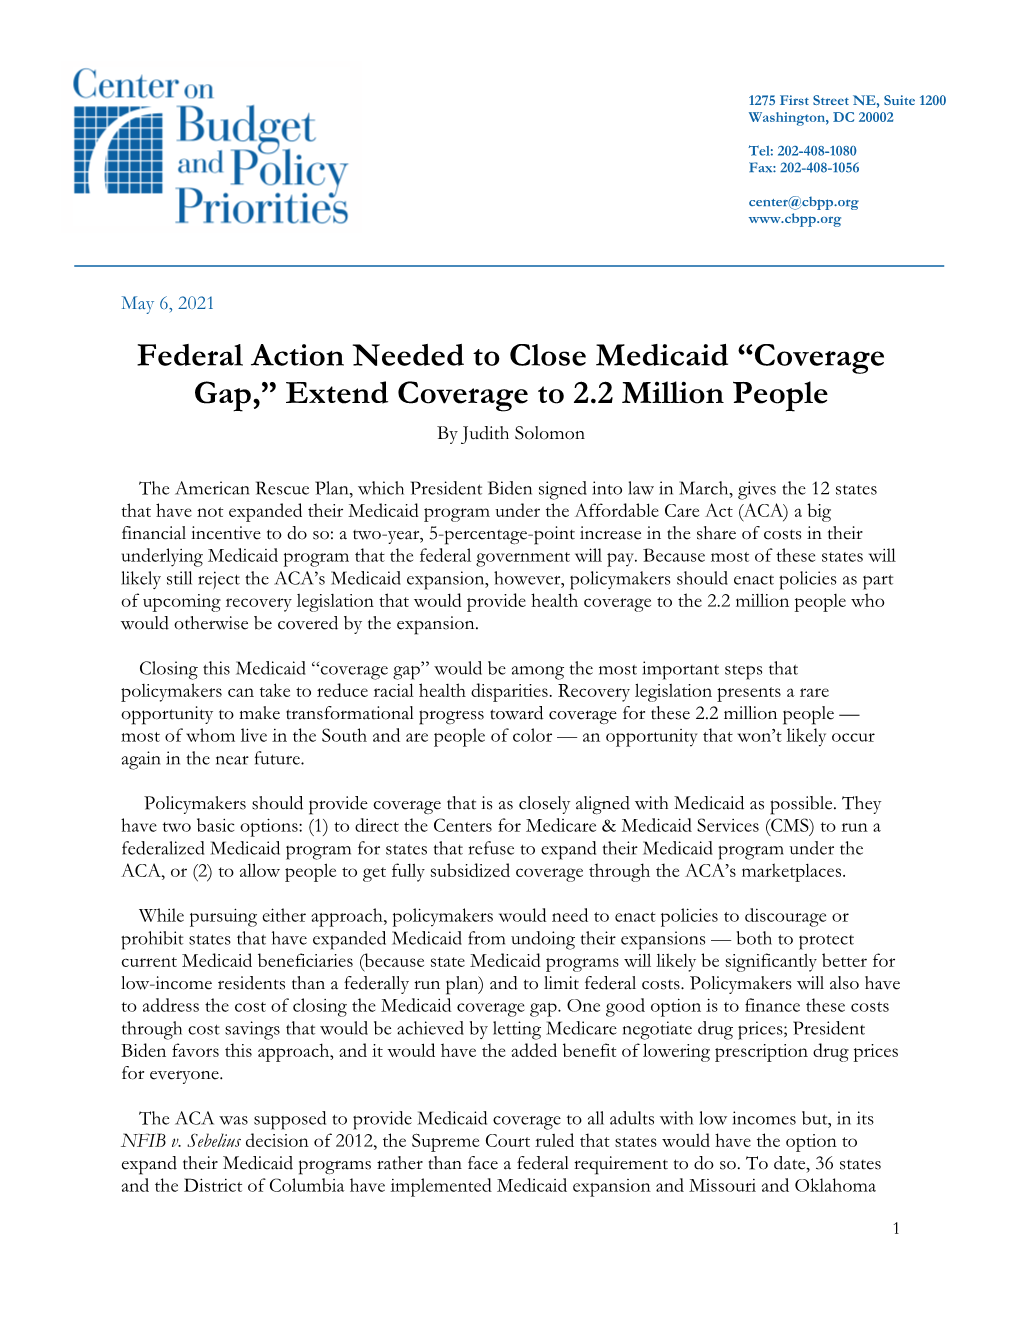 Federal Action Needed to Close Medicaid “Coverage Gap,” Extend Coverage to 2.2 Million People by Judith Solomon